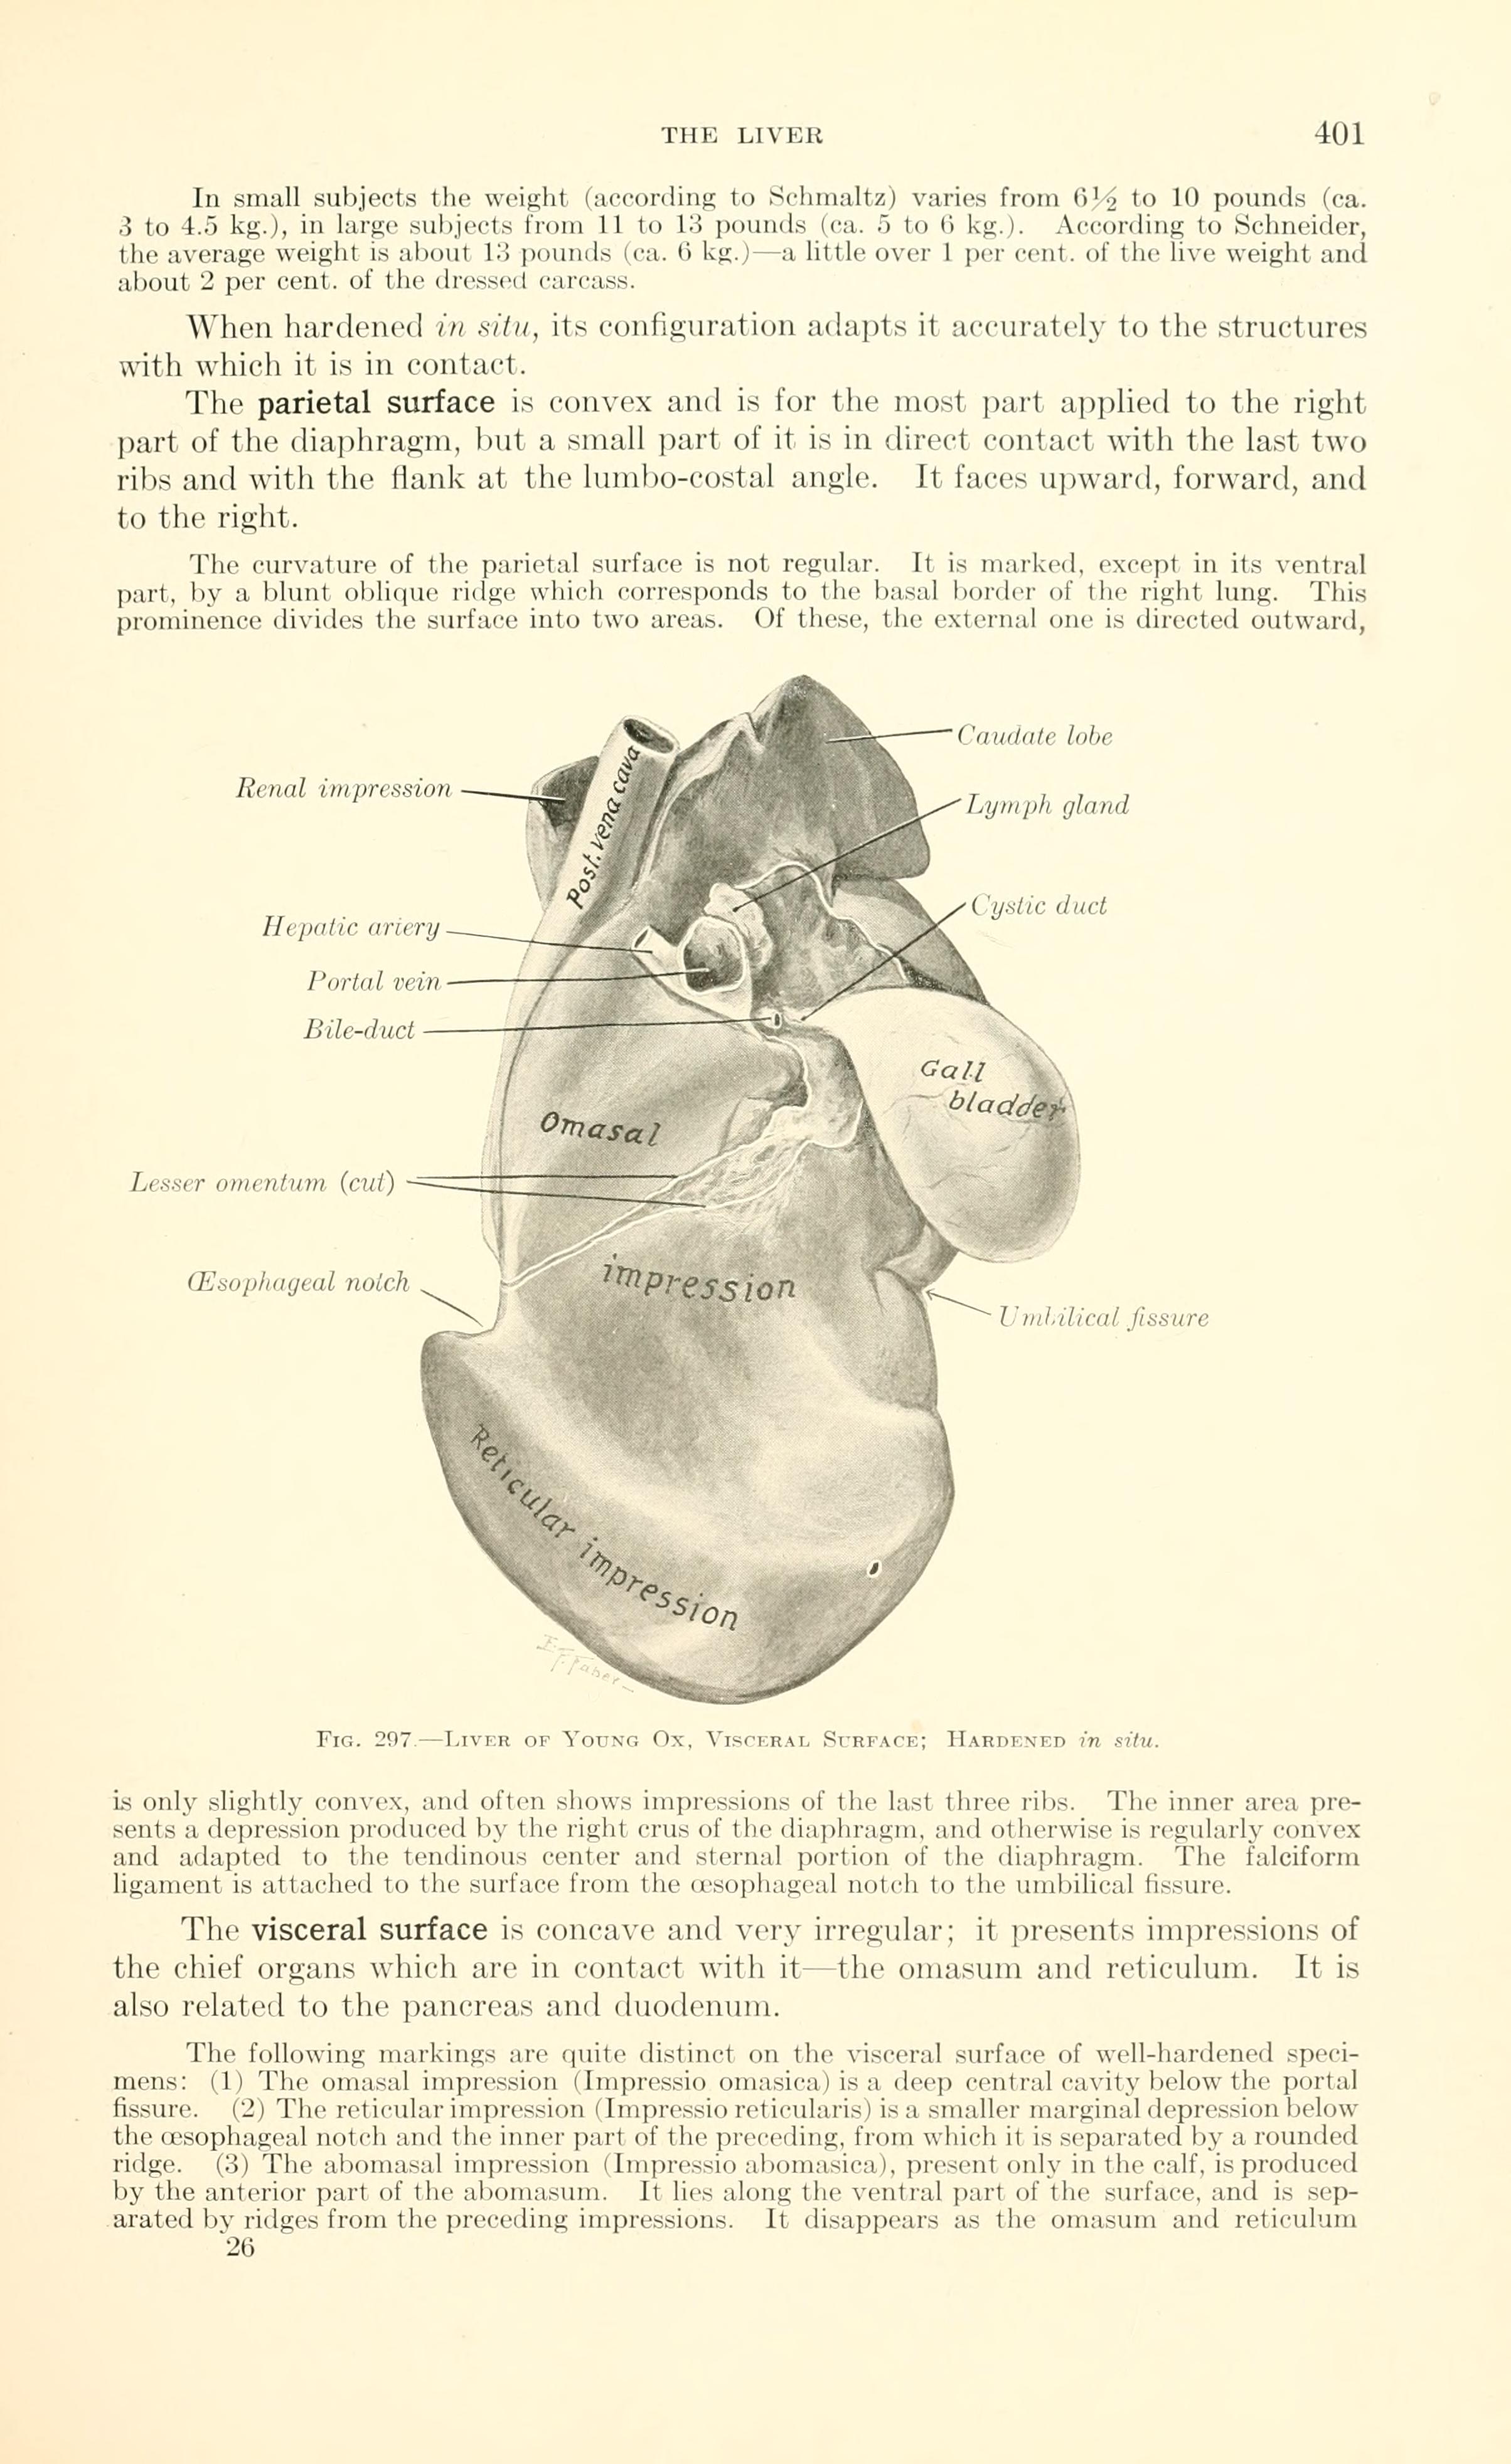 https://upload.wikimedia.org/wikipedia/commons/e/eb/A_text-book_of_veterinary_anatomy_%28Page_401%29_BHL18587525.jpg